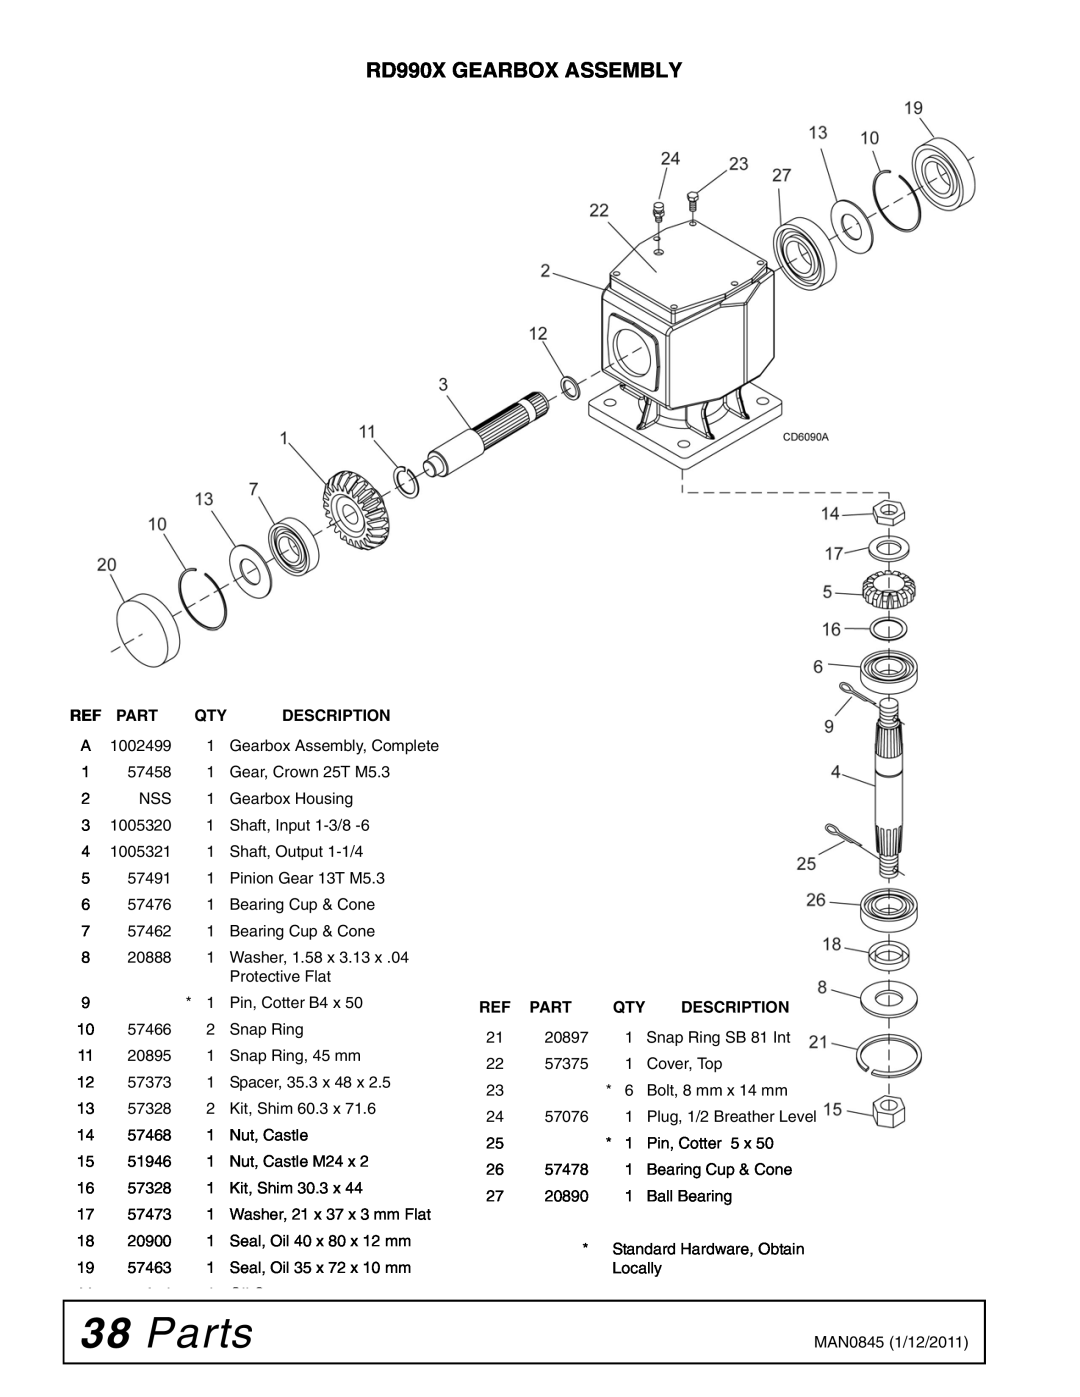 Woods Equipment manual Parts, RD990X GEARBOX ASSEMBLY, Description 